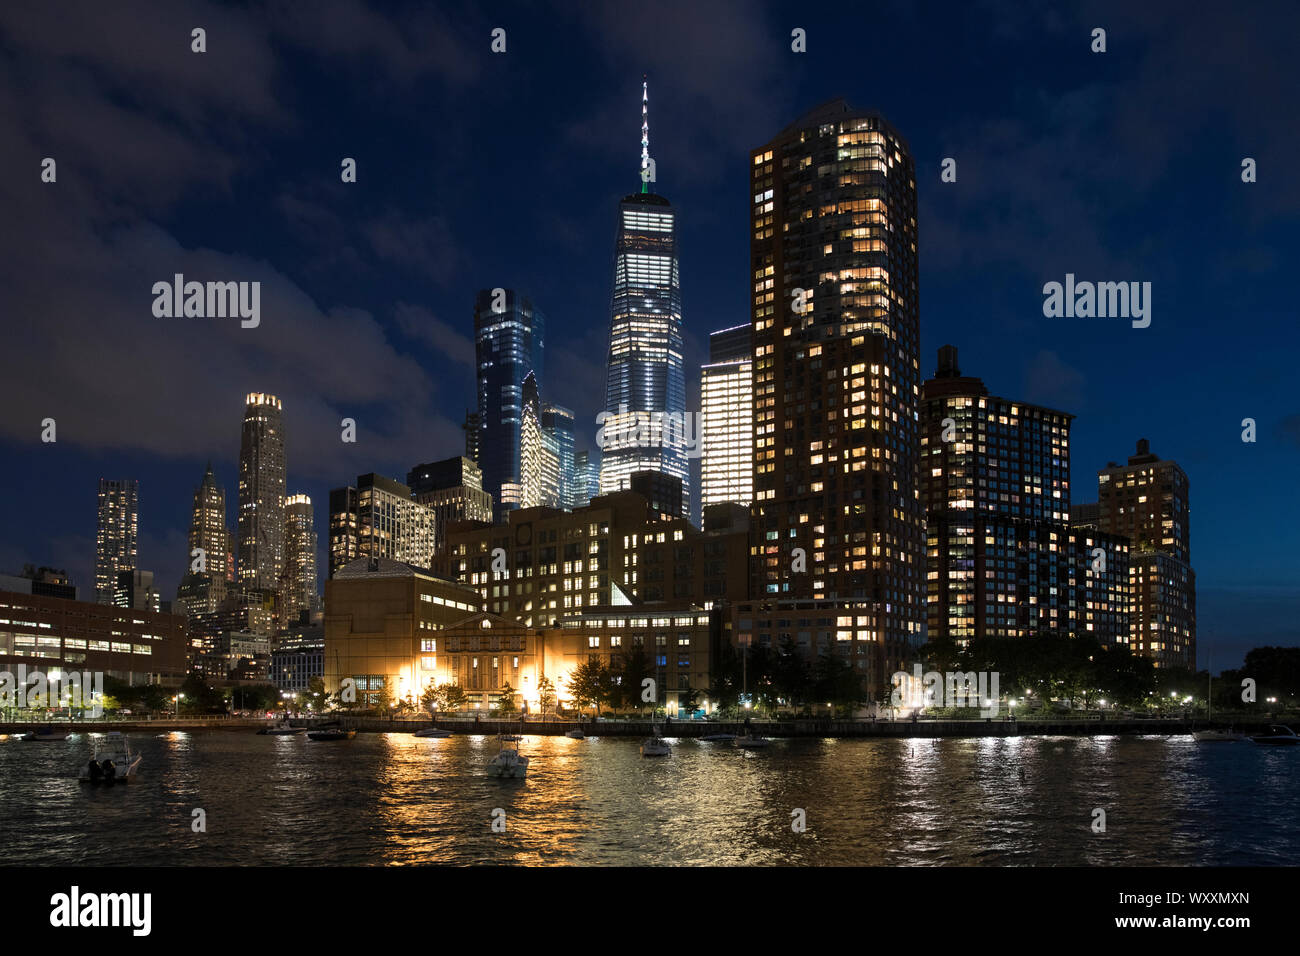 New York skyline at night showing the famous Freedom Tower (in place of the World Trade Centre) and the Hudson River from Pier 25 Stock Photo